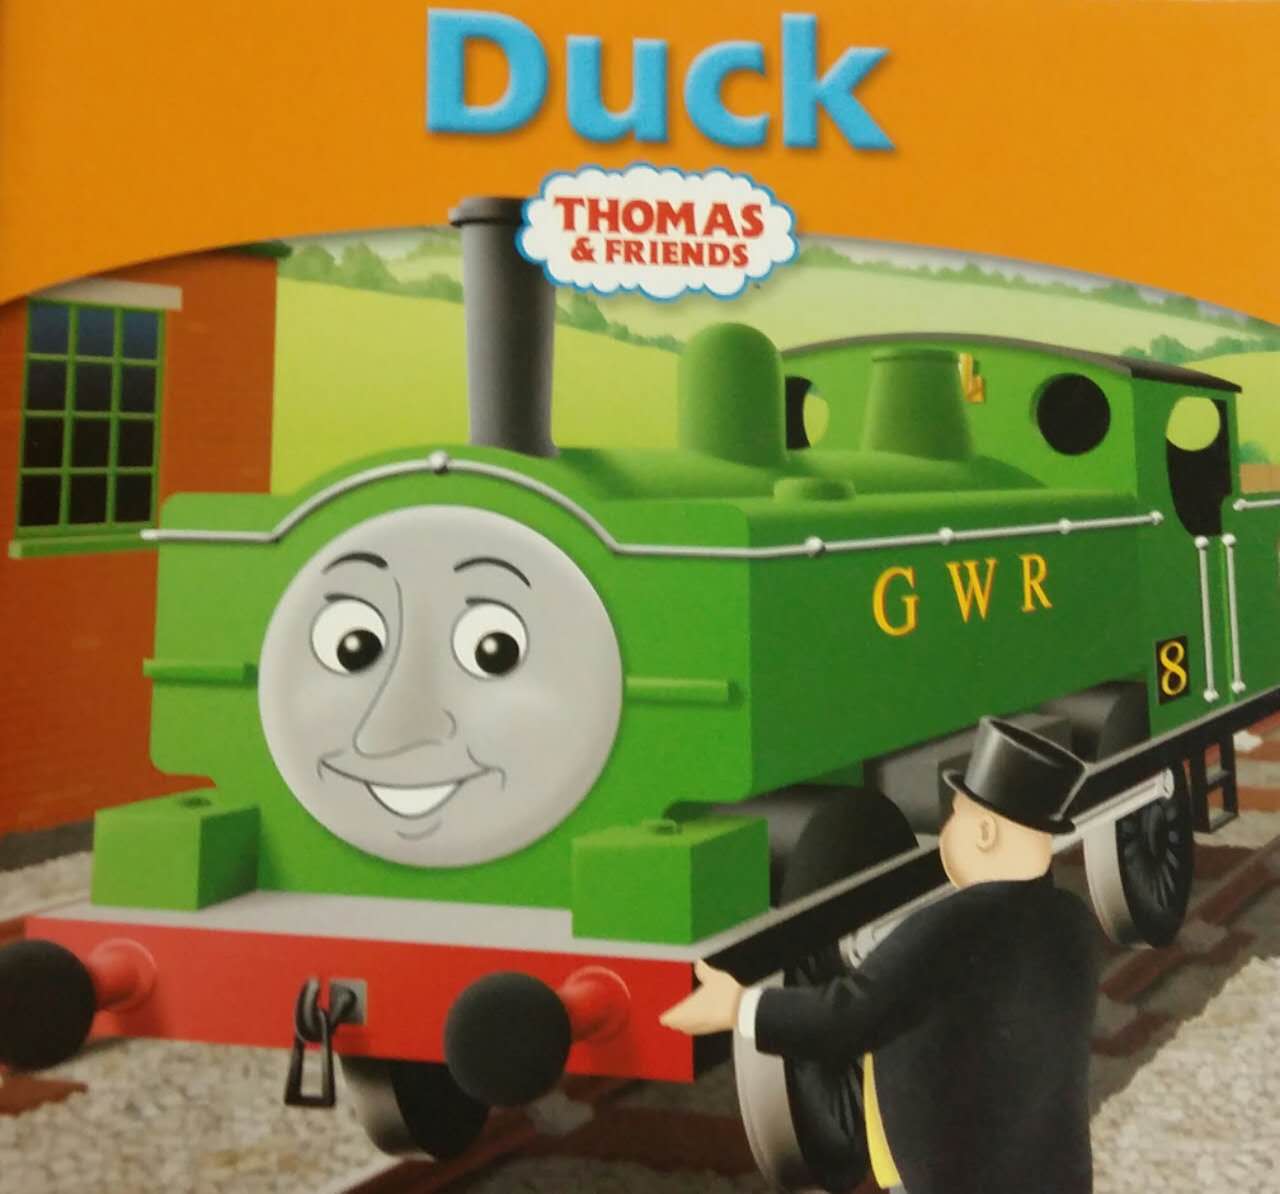 Thomas and his friends：Duck